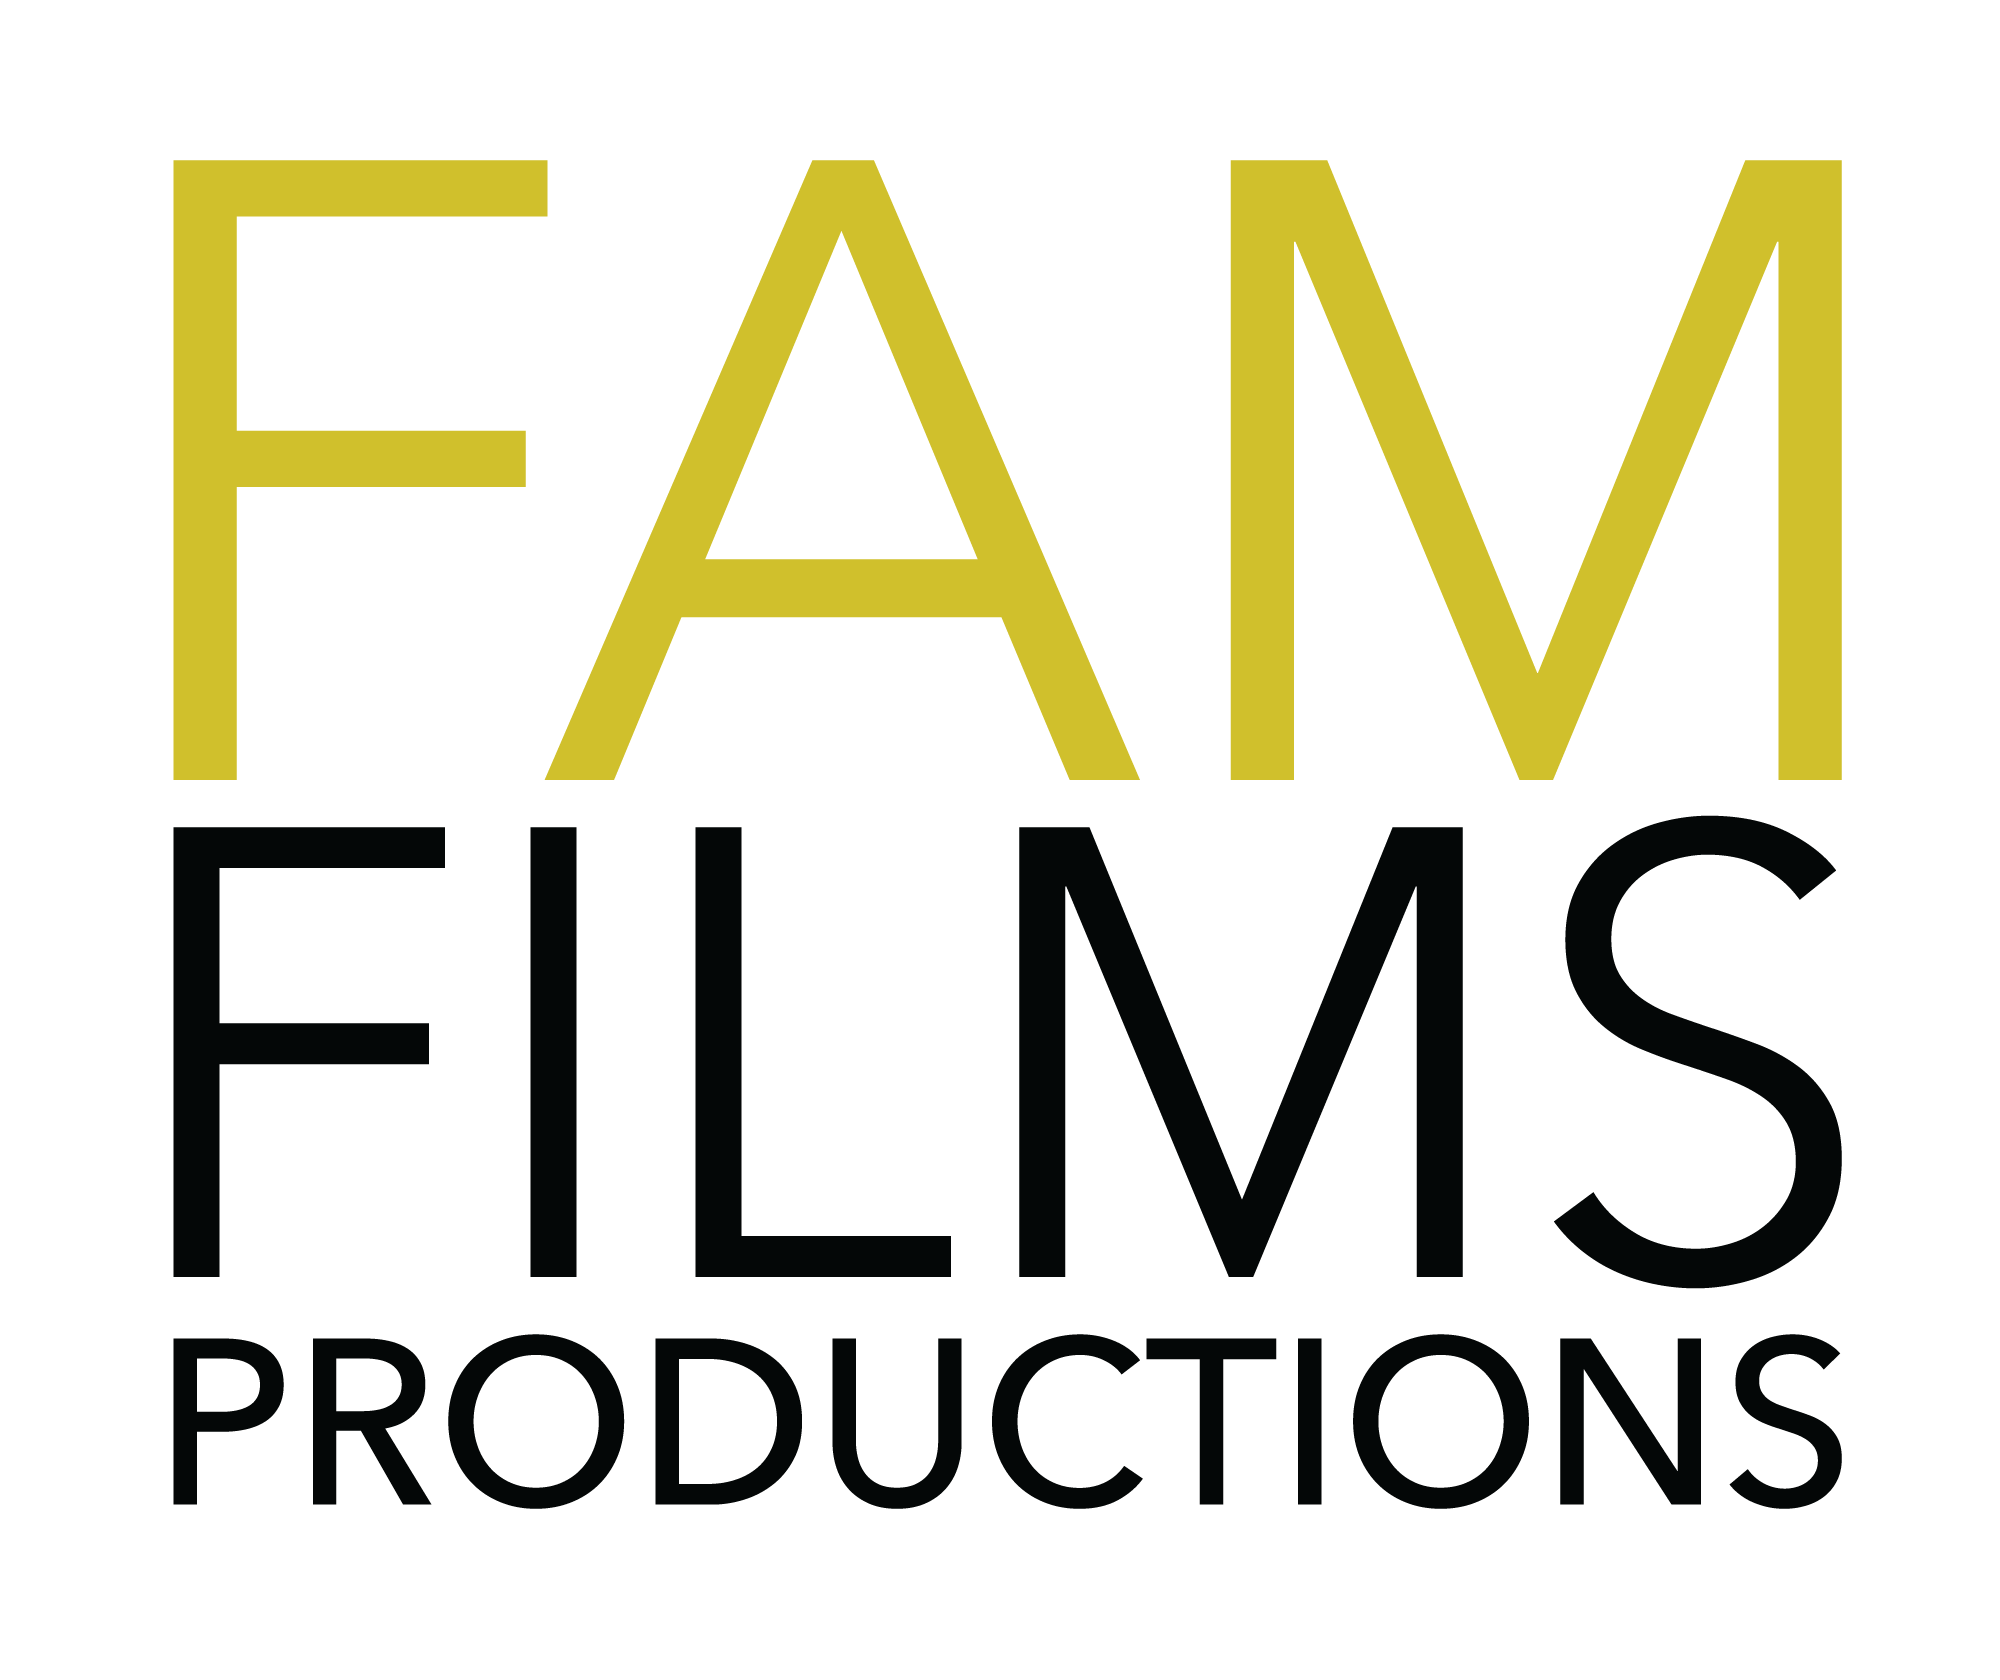 Fam Films Productions logo - green and black font on white